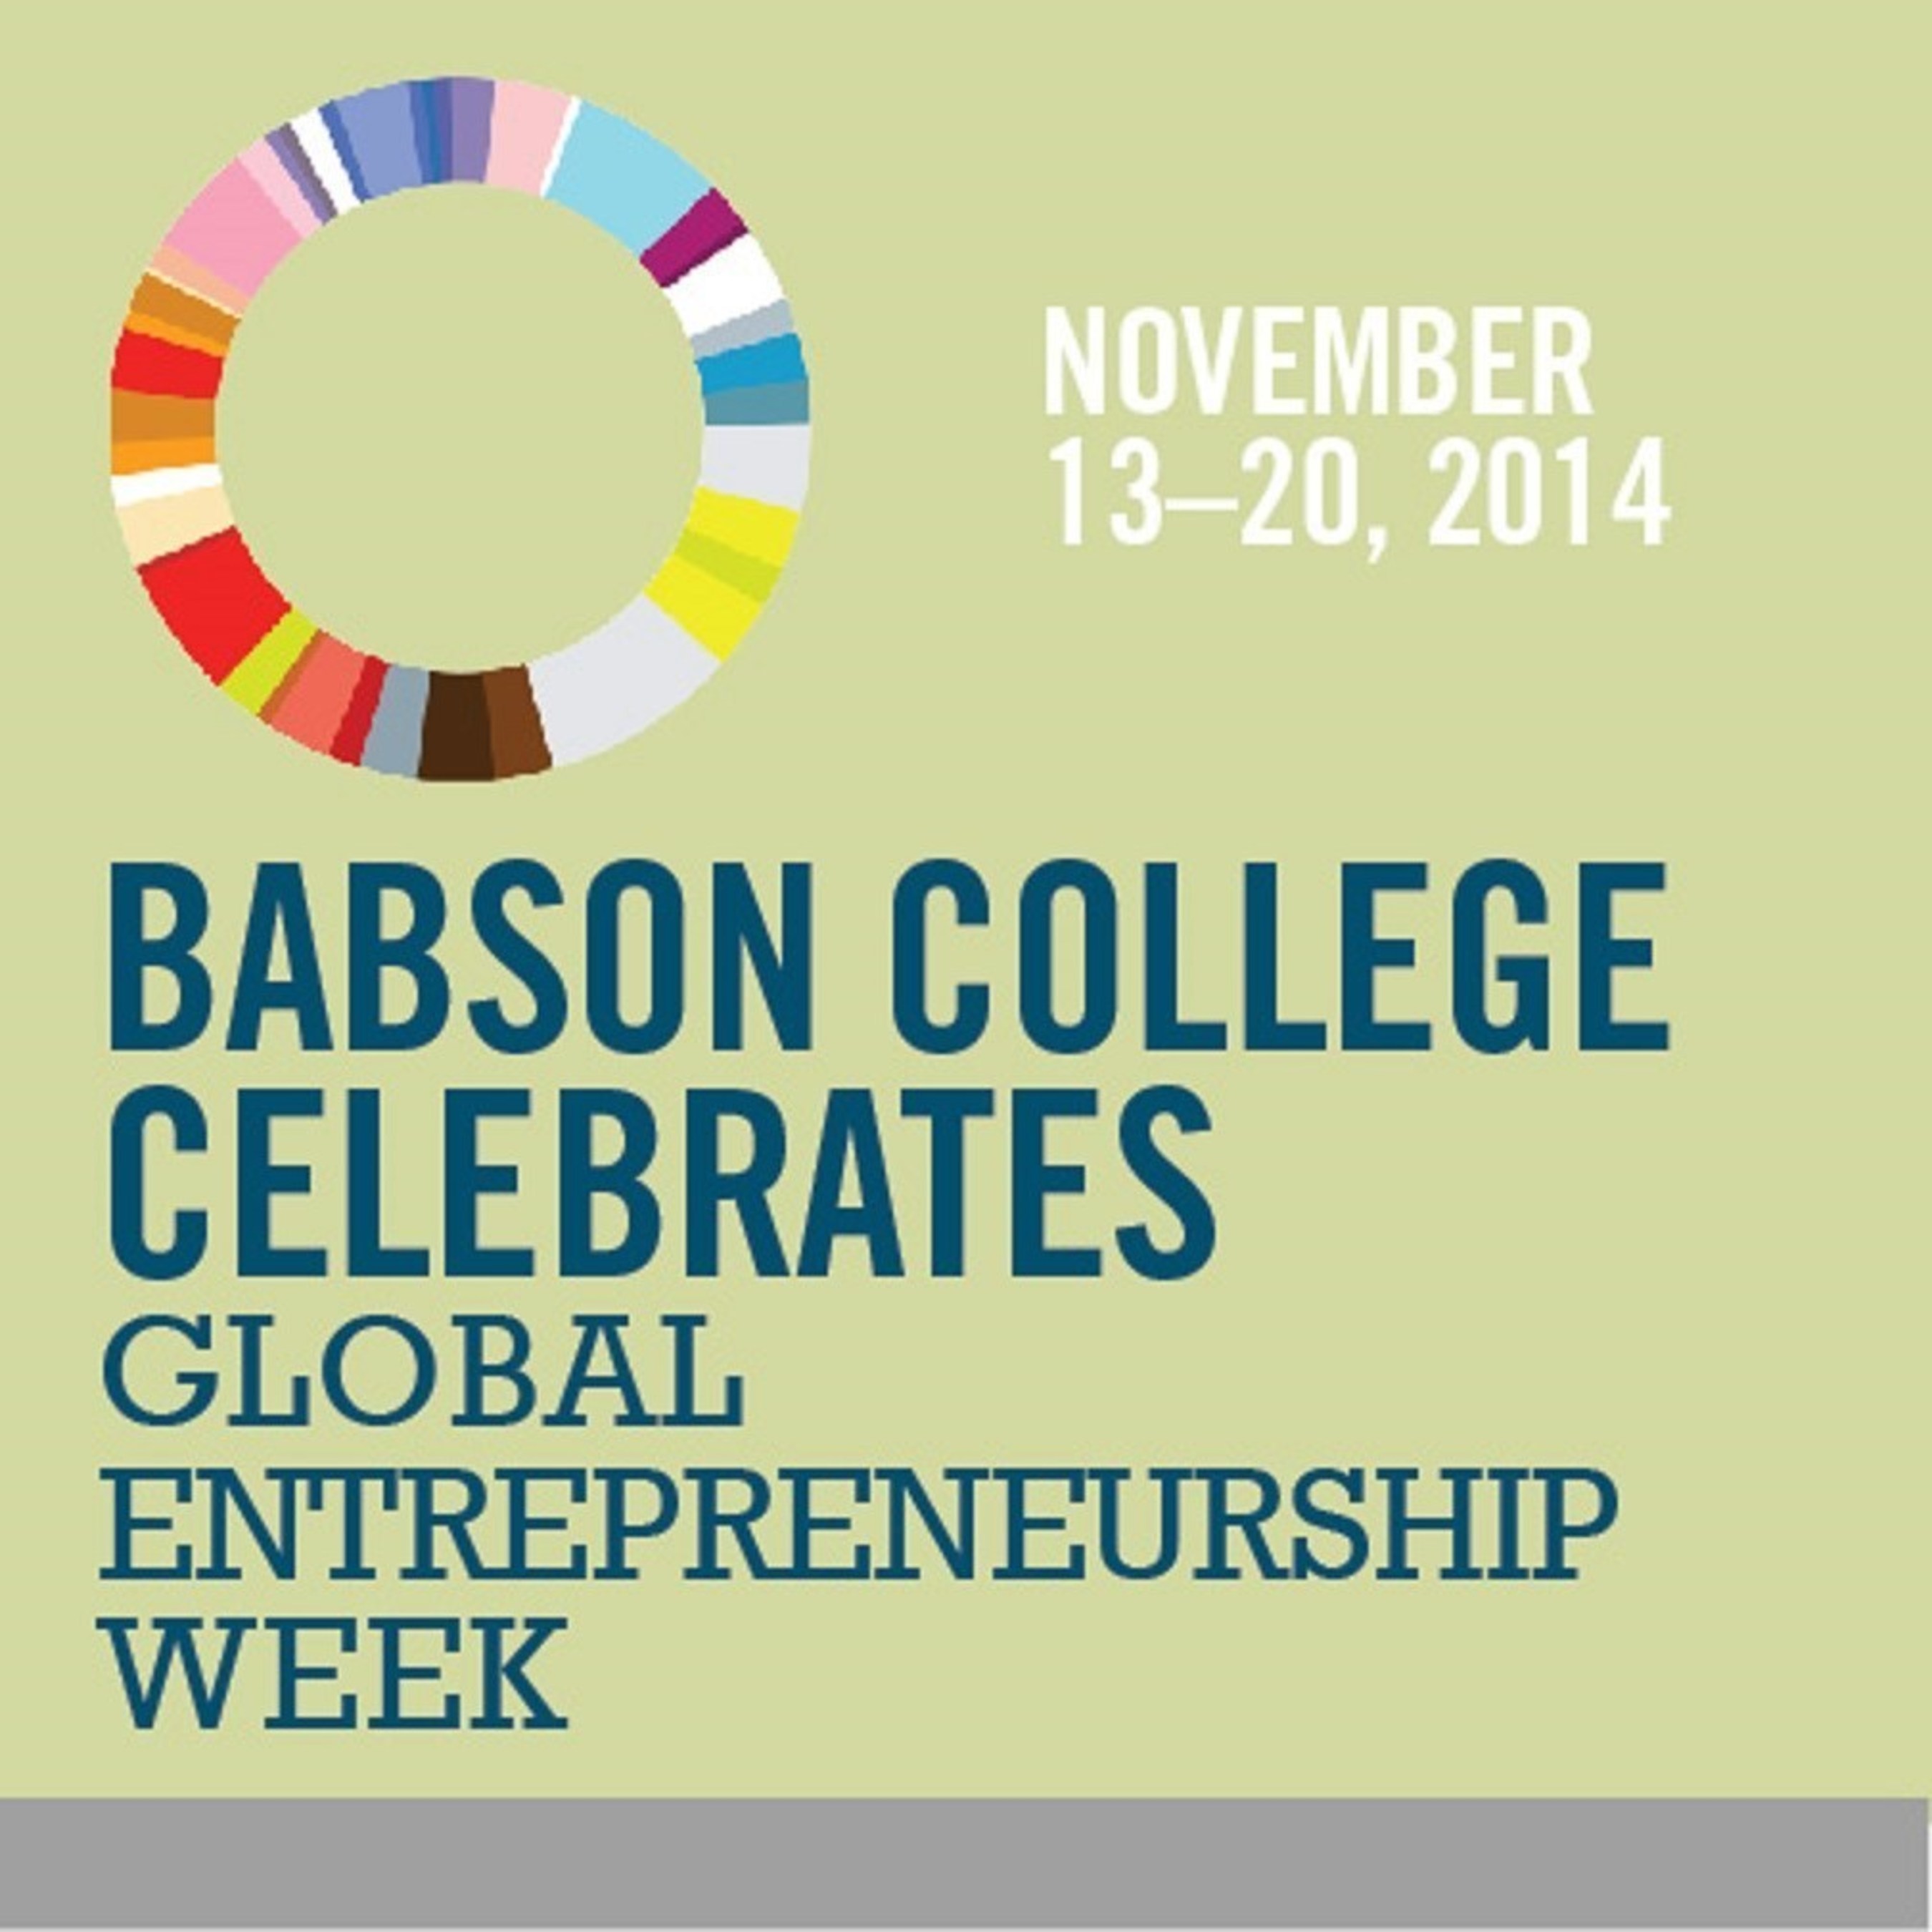 Babson College's Thought Leaders Featured at U.S. State Department's Global Entrepreneurship Summit in Morocco